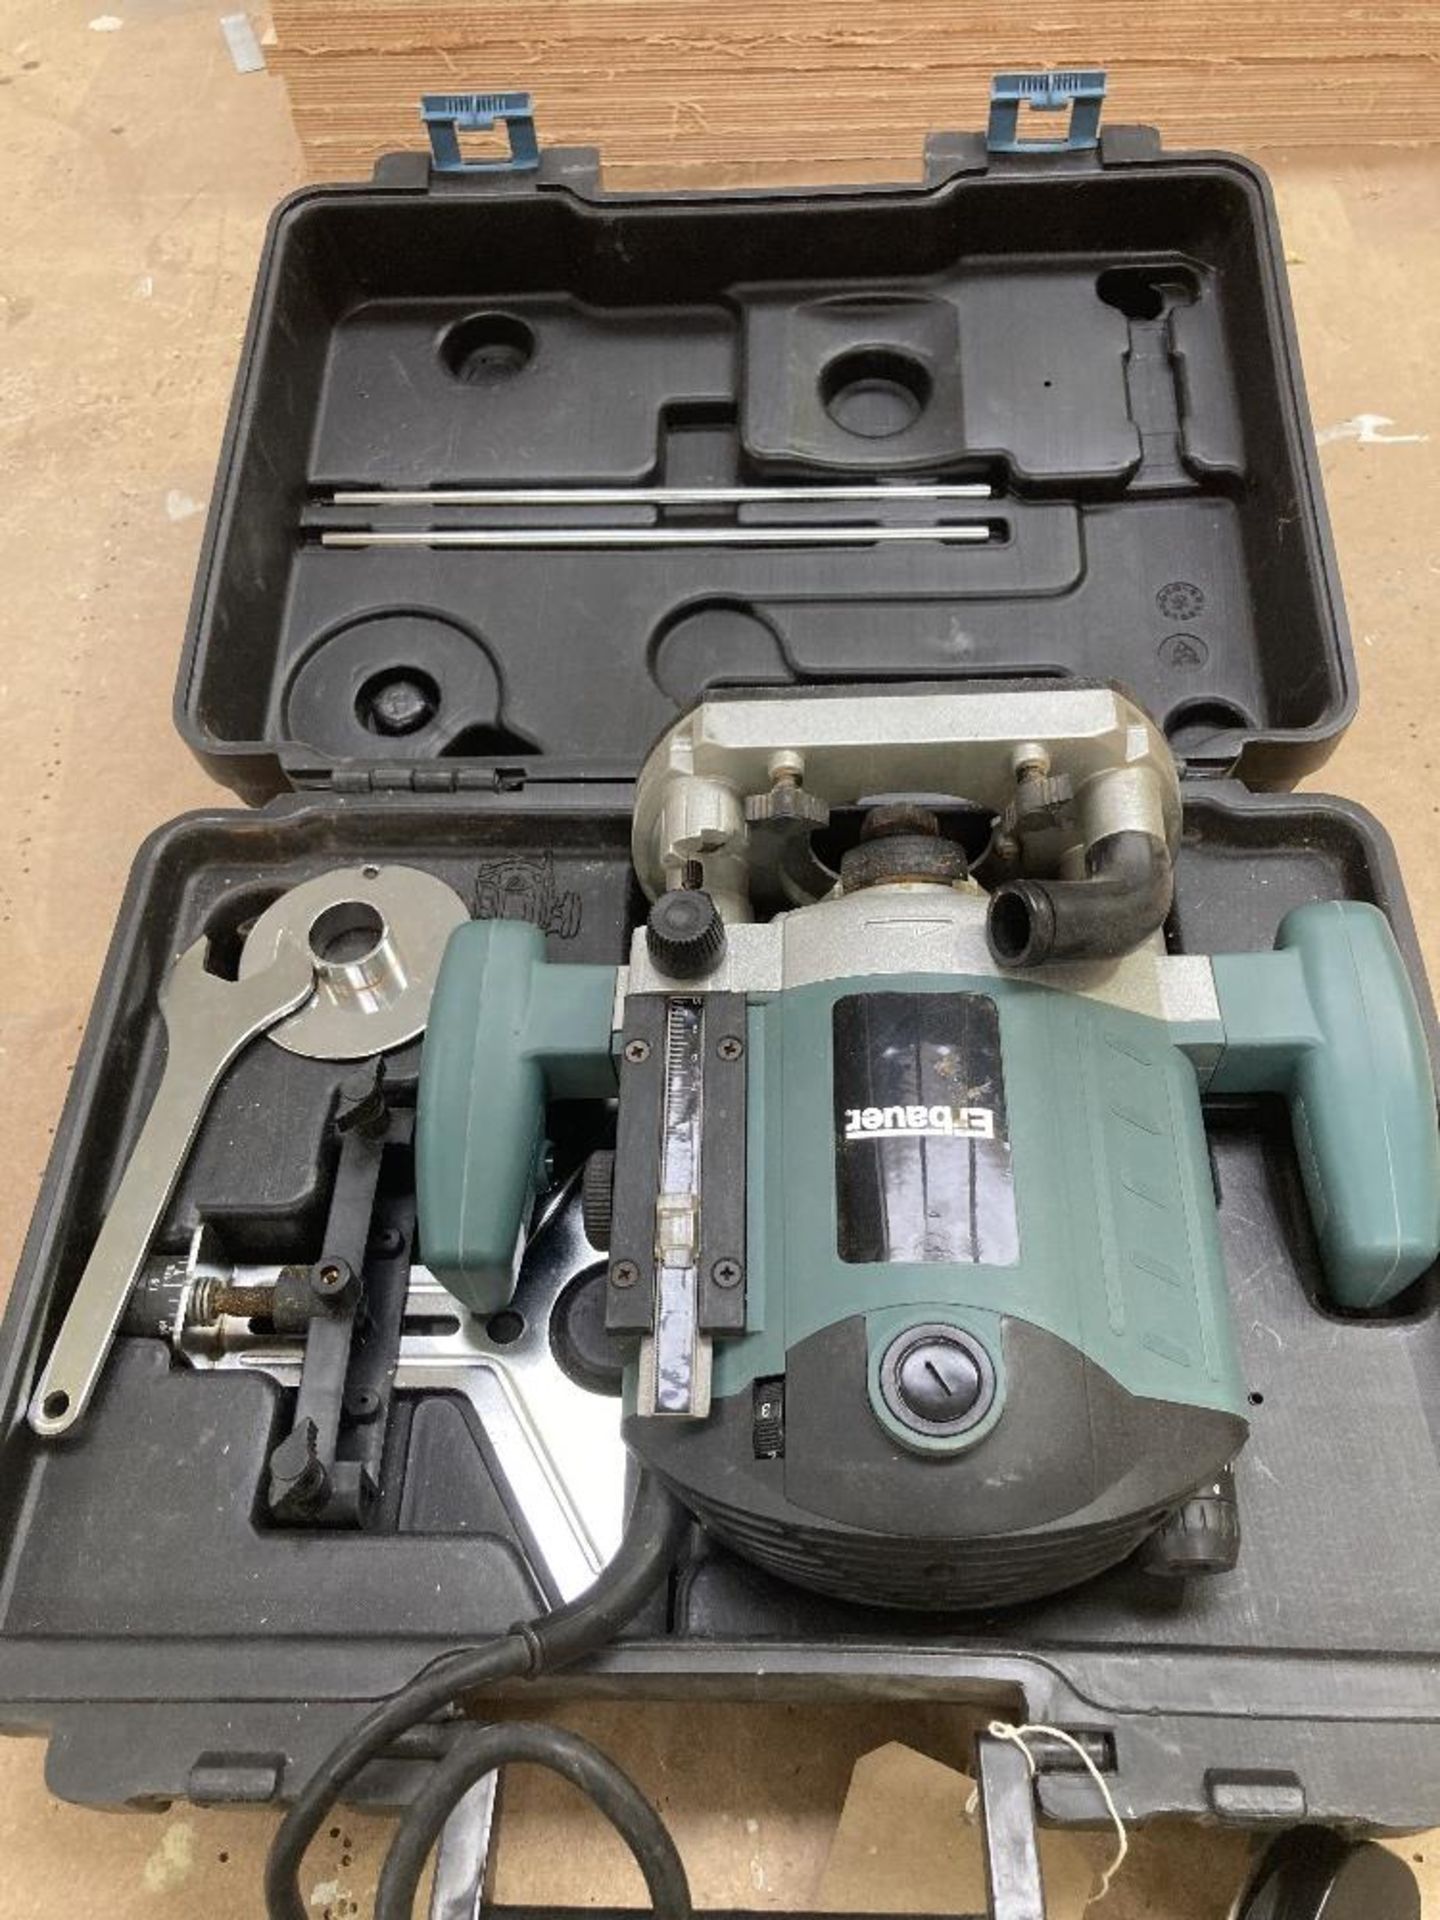 Erbauer ERB210C 1/2" Router & Heavy Duty Carry Case - Image 6 of 8